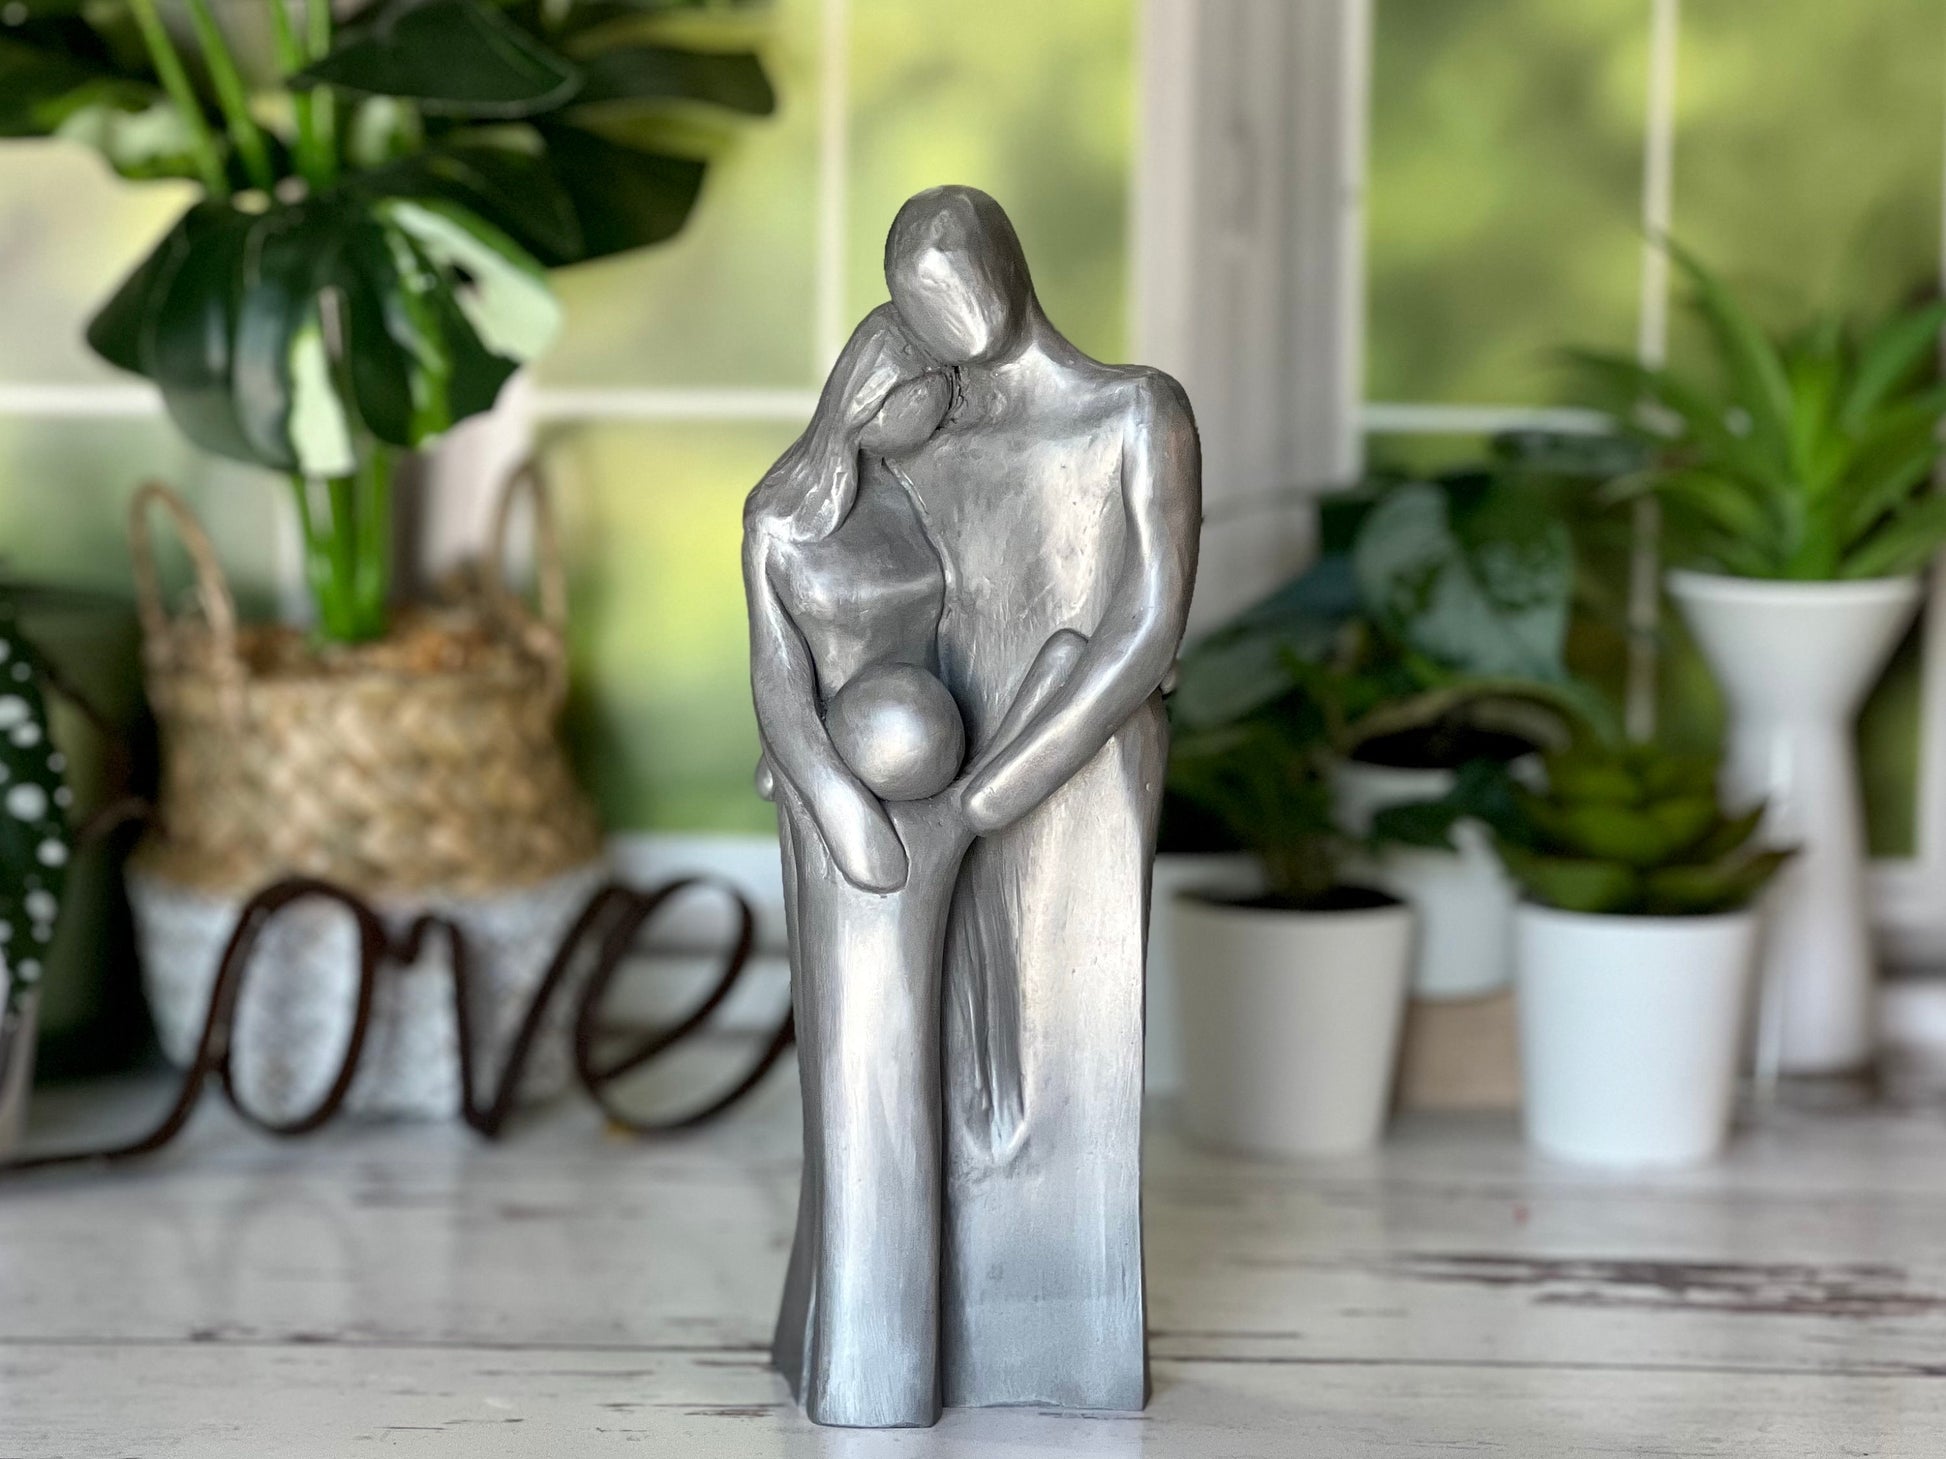 Family of Three 10 Year Anniversary Aluminum Sculpture, Anniversary Gift for Men, Gift for Her, 10 Years Gift for Husband Wife